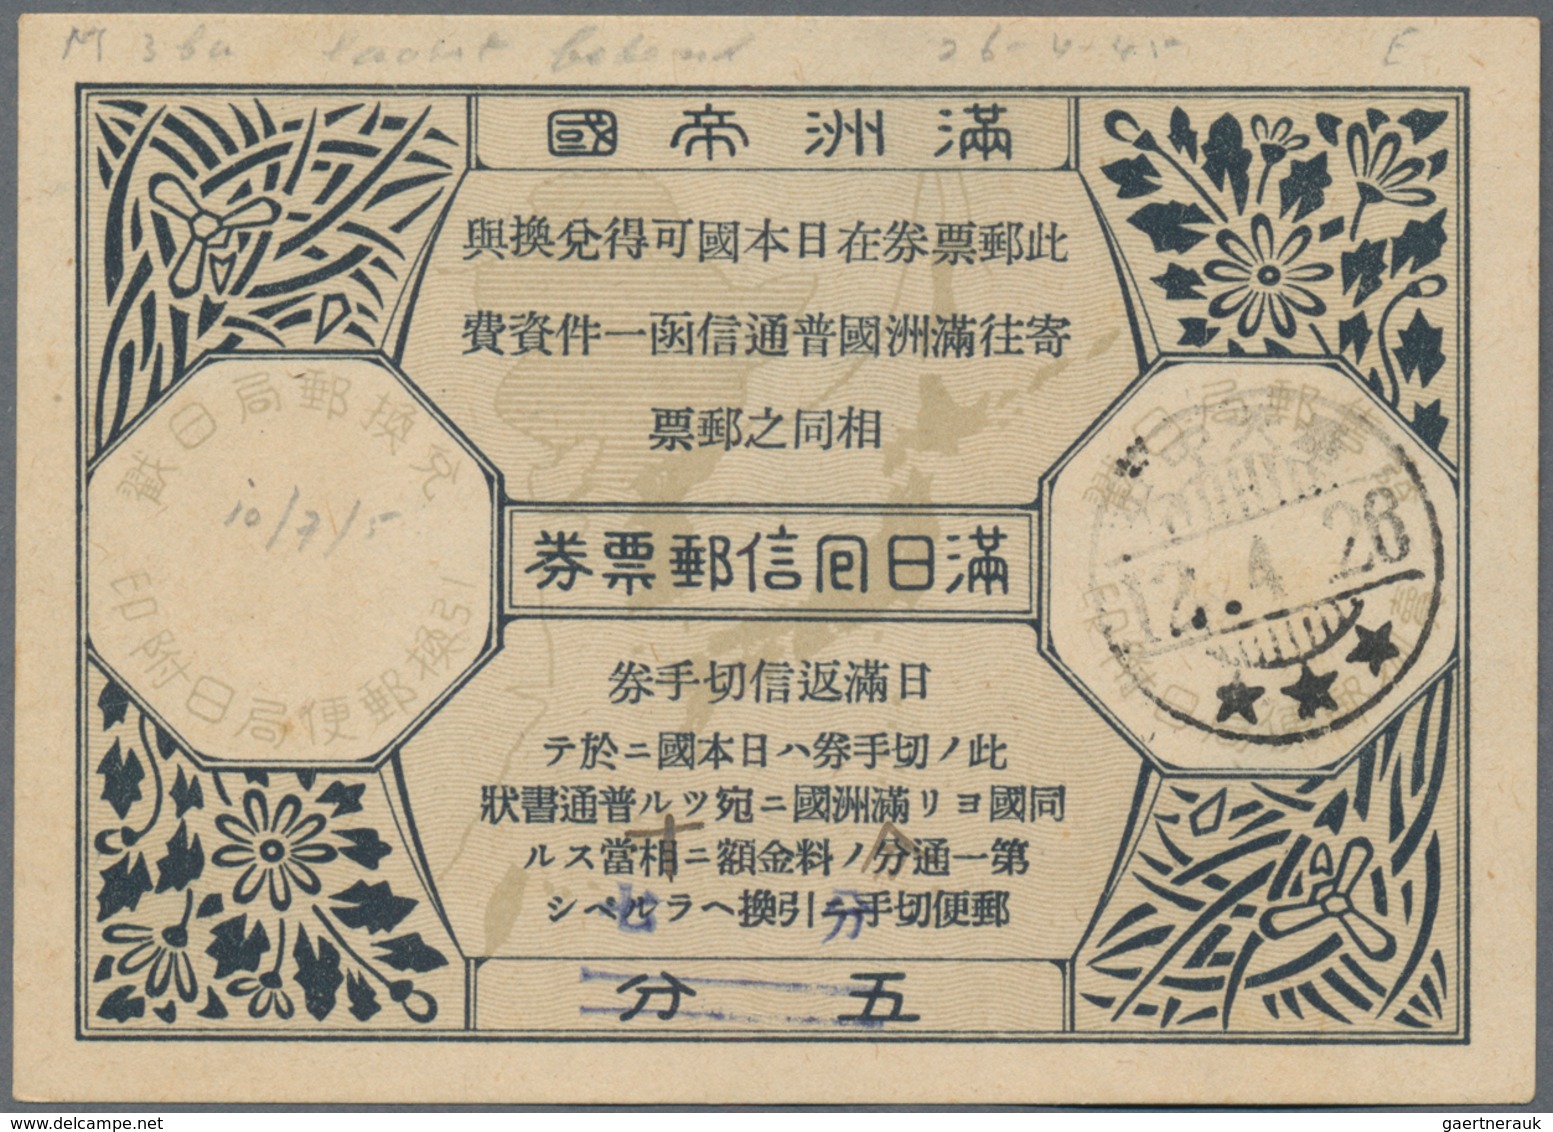 Mandschuko (Manchuko): 1936/42, the collection of Manchuko-Japan special reply coupons: 4 f., 4 f./5